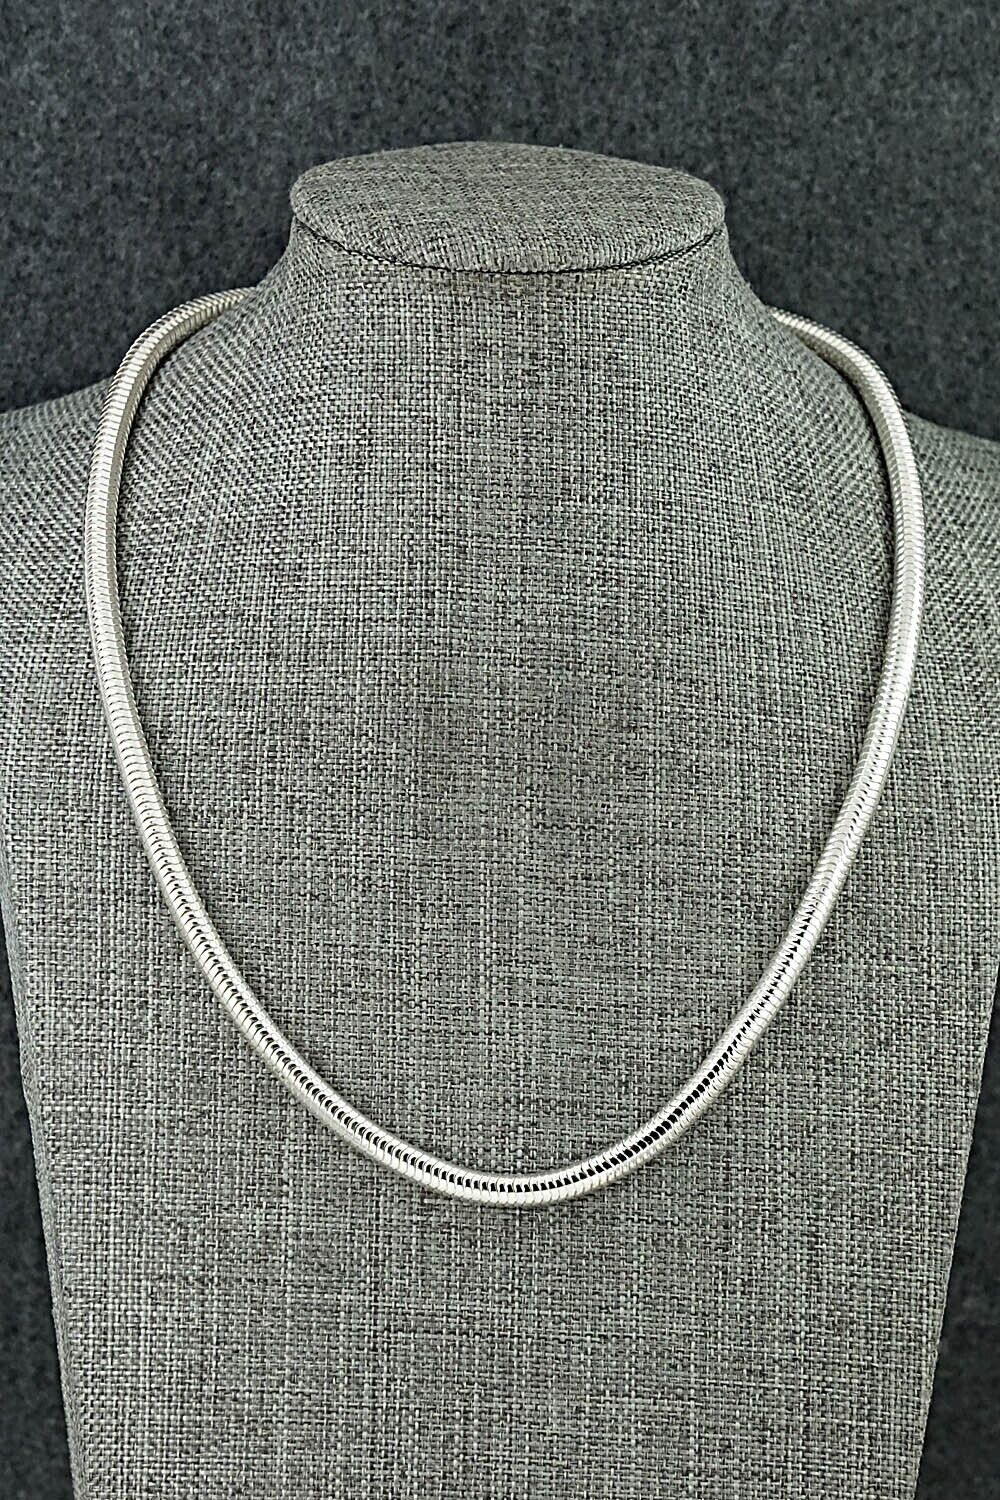 Sterling Silver Chain Necklace - Sterling Silver 18"